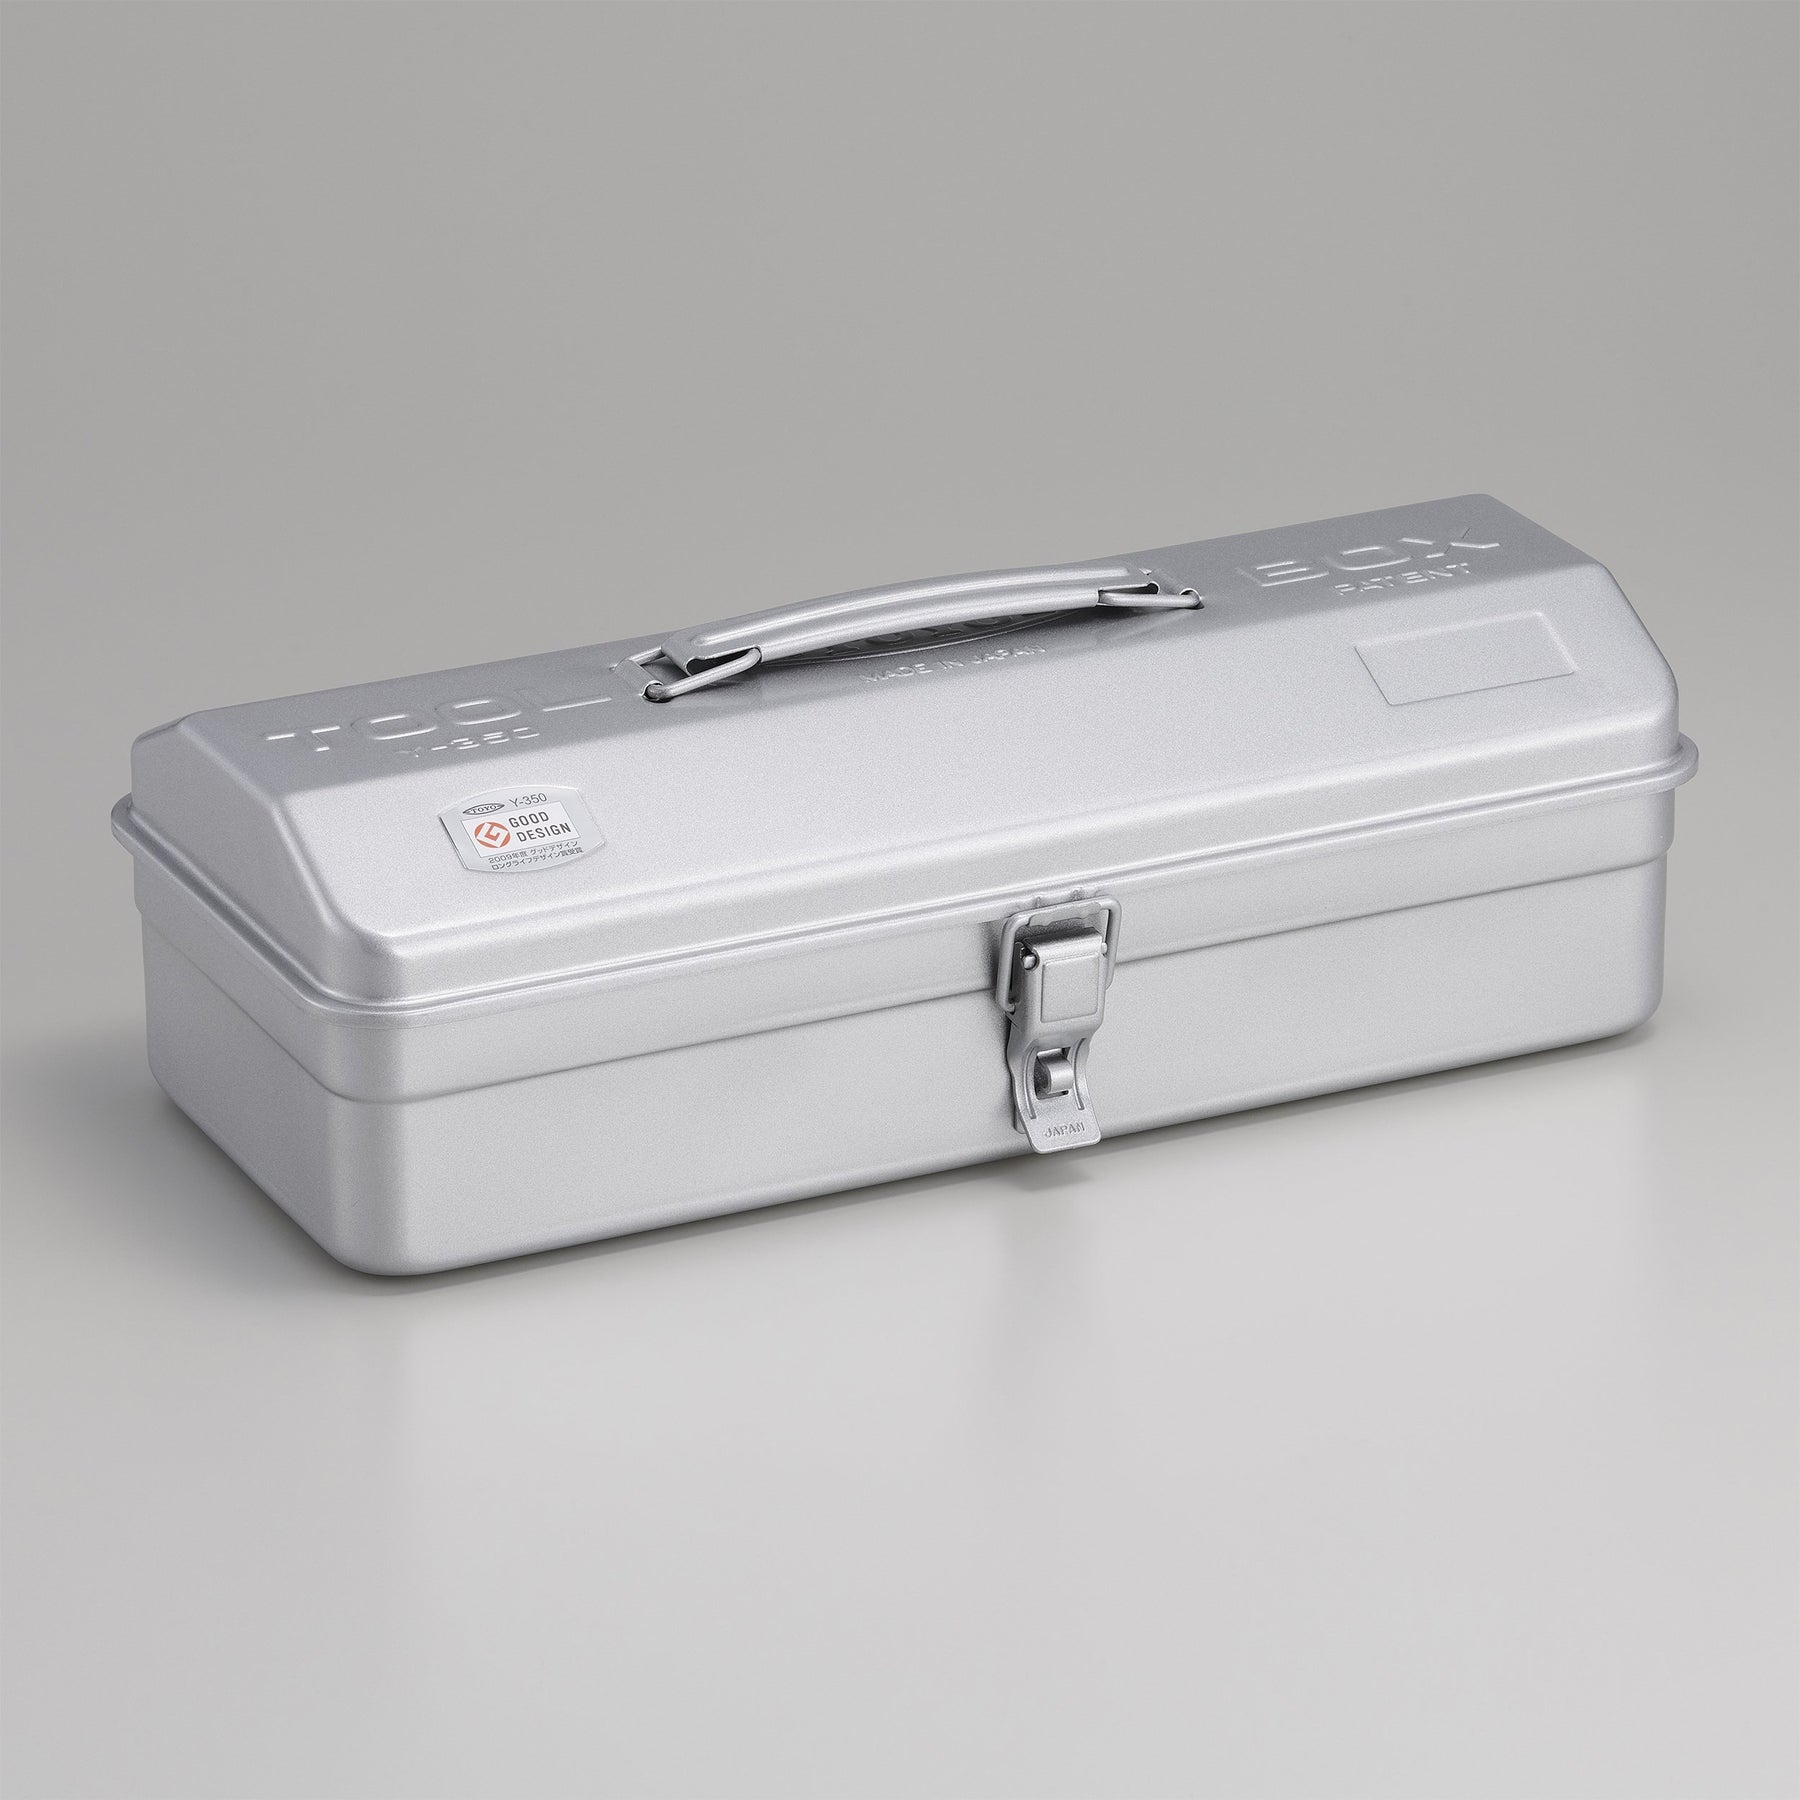 Steel Toolbox with Top Handle and Camber Lid, style Y-350